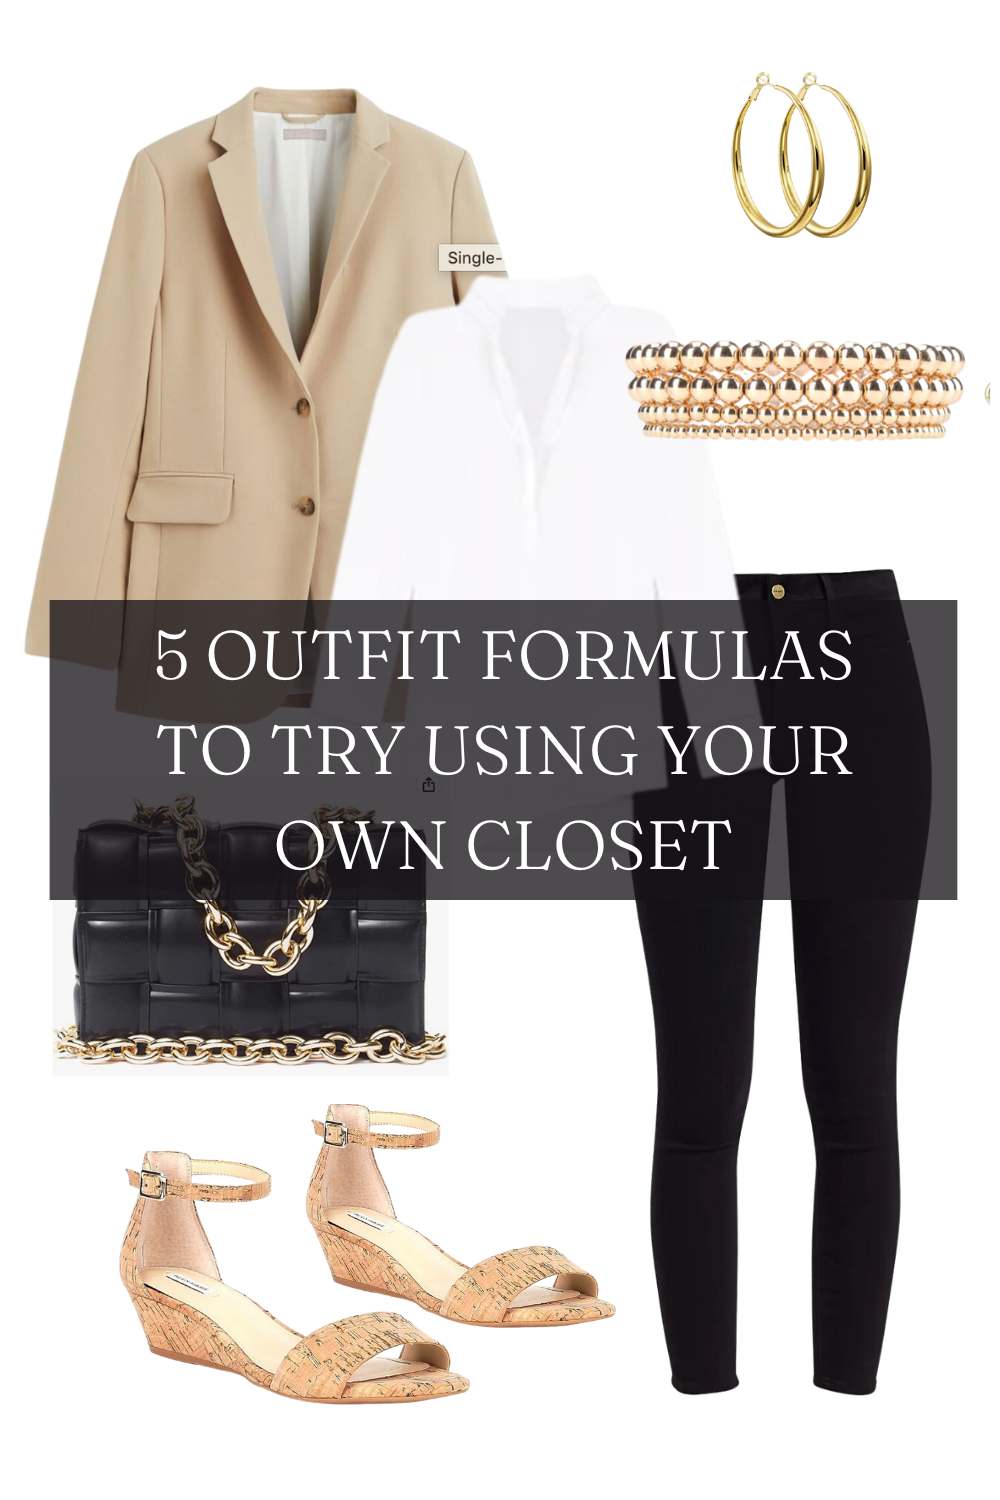 5 Common Event Outfit Formulas You Can Easily Recreate